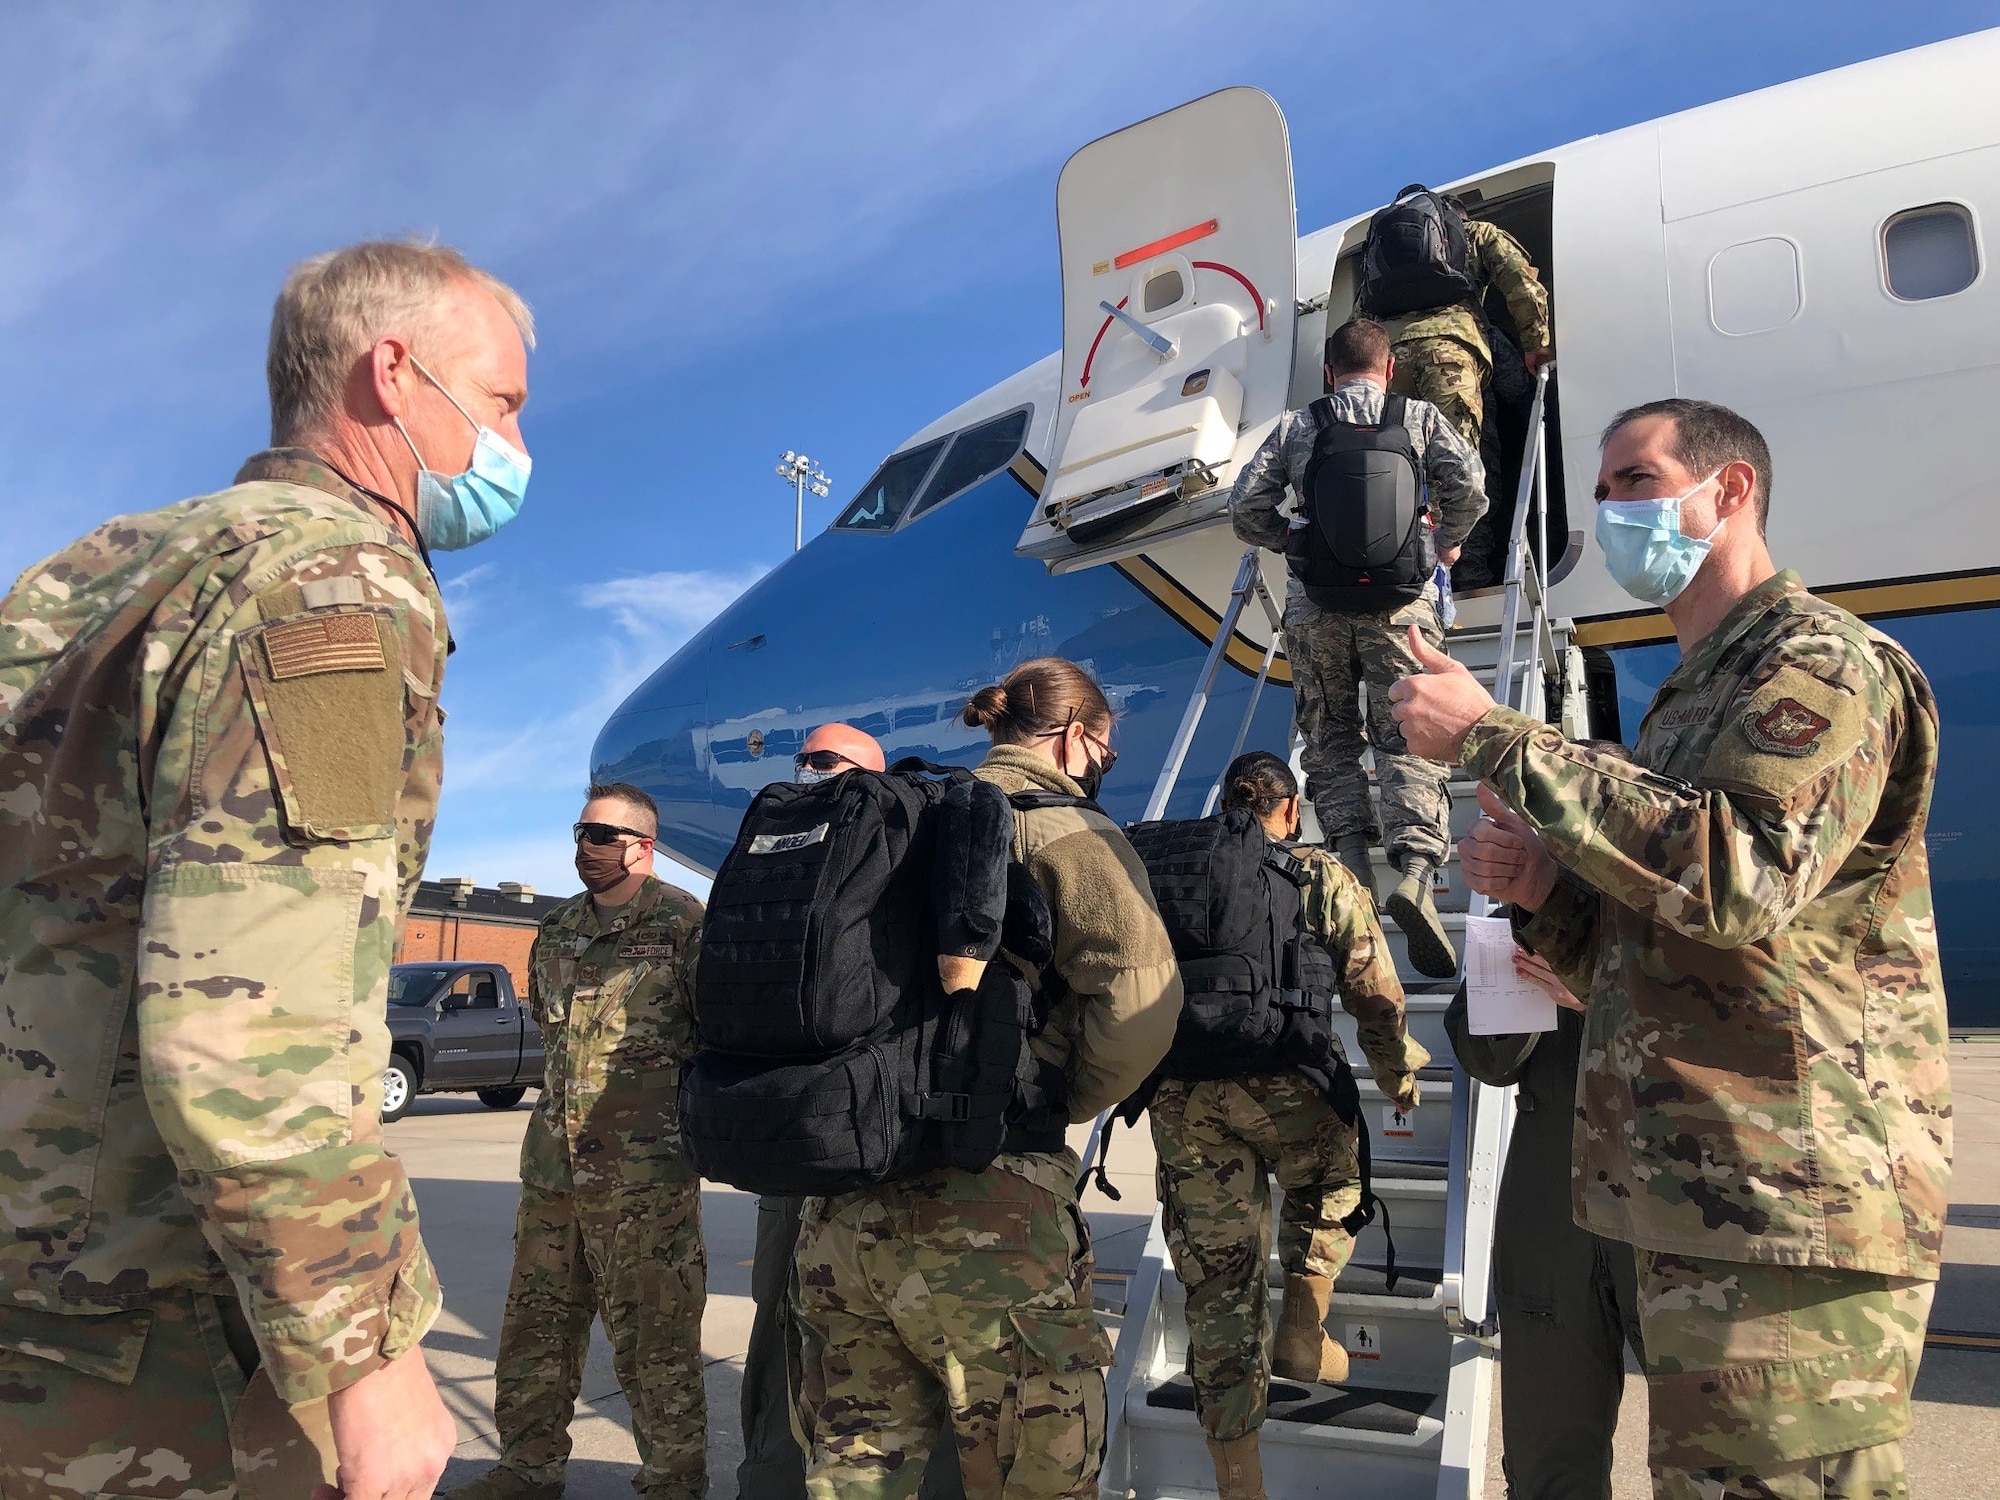 Master Sgt. Blair Bookland (left) and members of the 932nd Medical Group board an 932nd Airlift Wing C-40C, April 22 at Scott Air Force Base, Illinois to support COVID-19 relief efforts in New York. 932nd MDG commander, Col. Chris Spinelli (right) says farewell as they depart. This latest deployment brings the total of Air Force Reservists mobilized in support of COVID-19 relief efforts to more than 770 around the nation. (U.S. Air Force photo by Lt. Col. Stan Paregien)